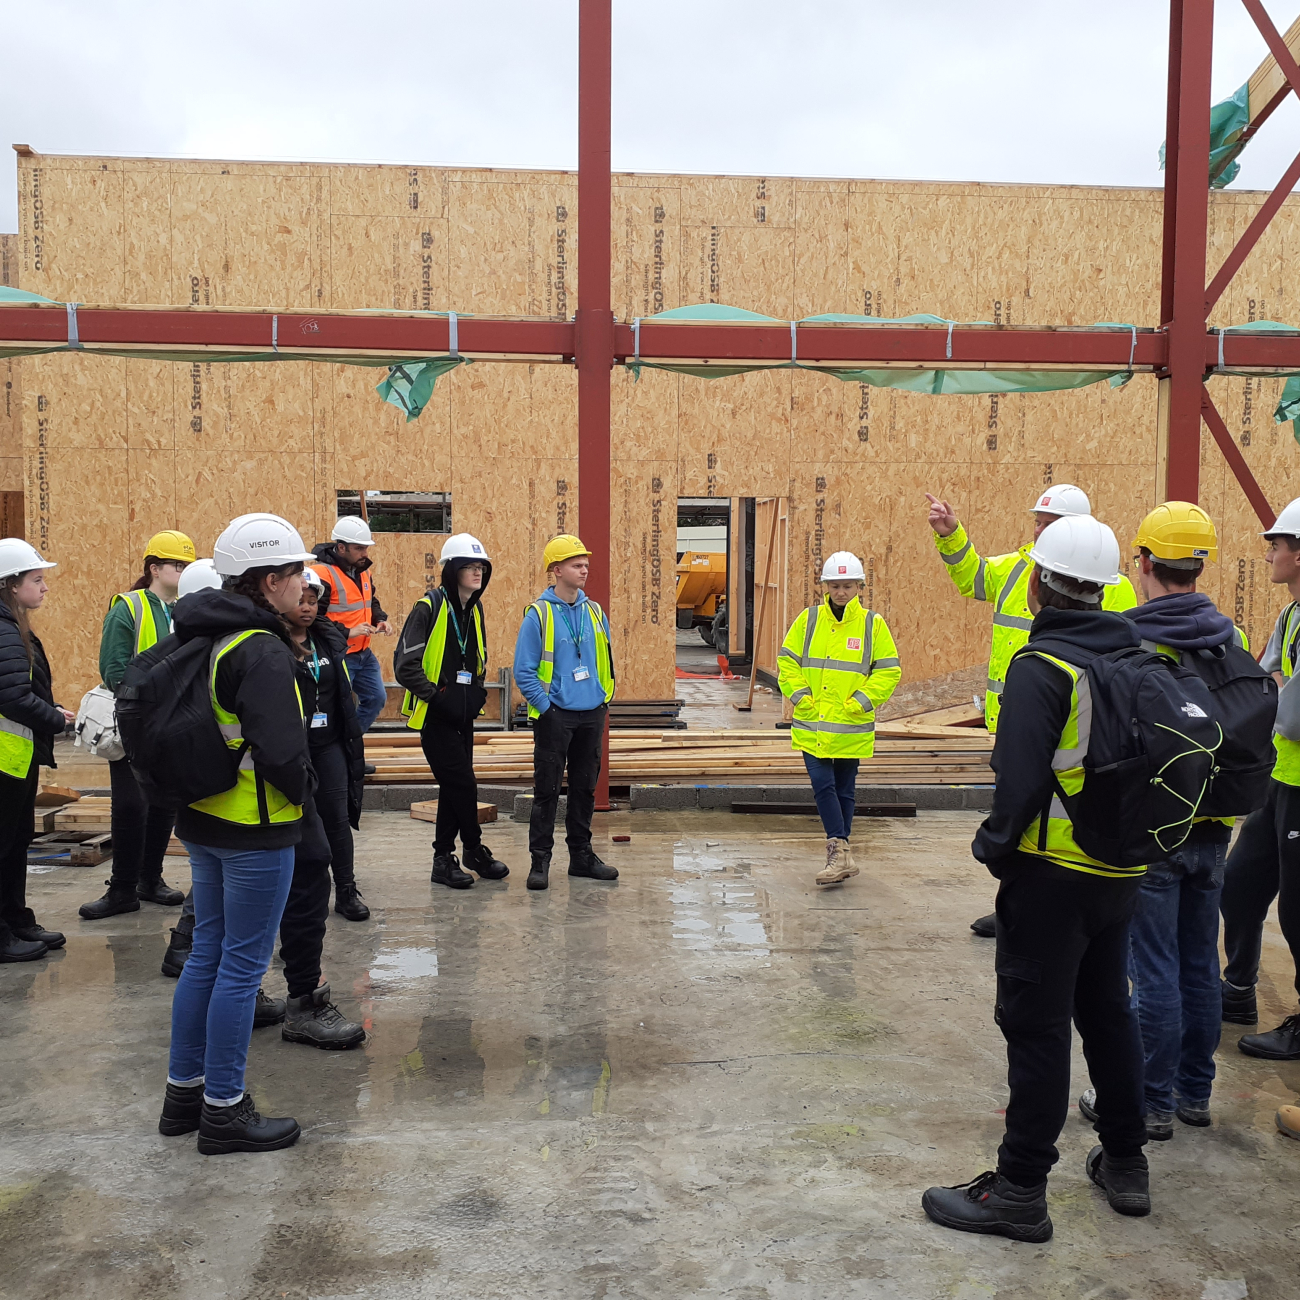 T Level learners visiting Ashcombe School Construction site